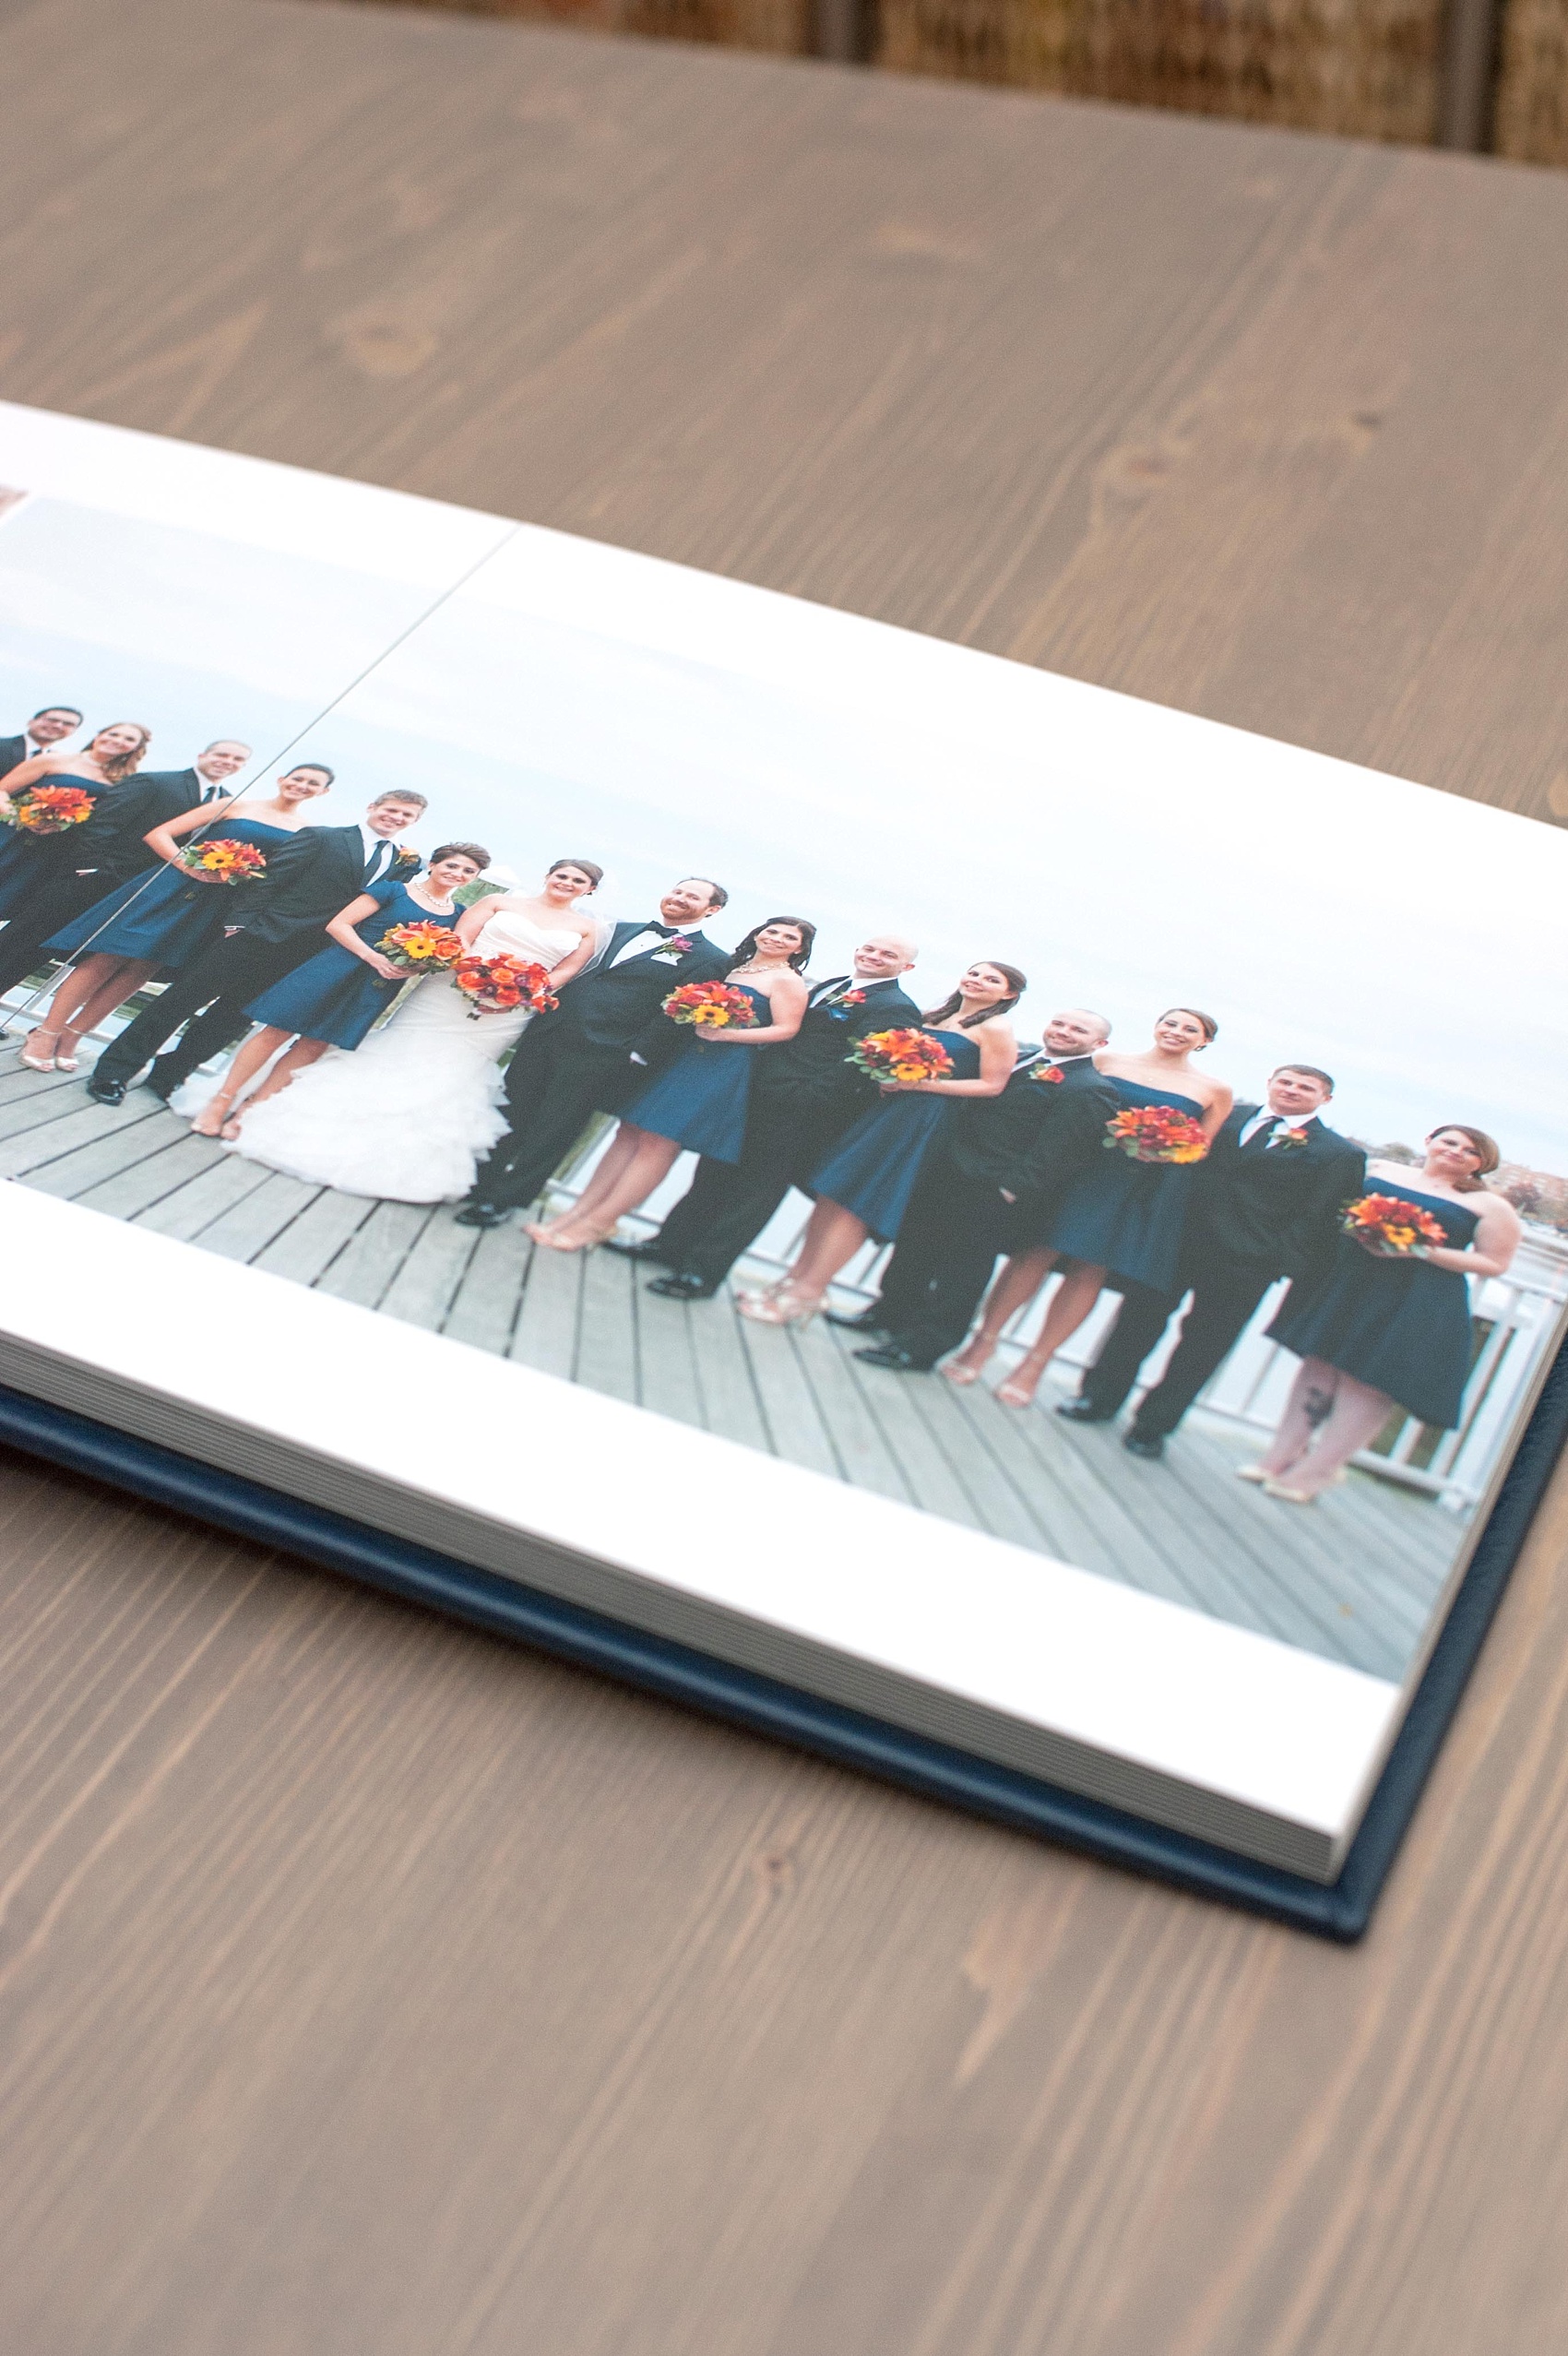 Mikkel Paige Photography photos of a fine art leather Madera wedding album in navy blue. 12x12" album for the bride and groom.